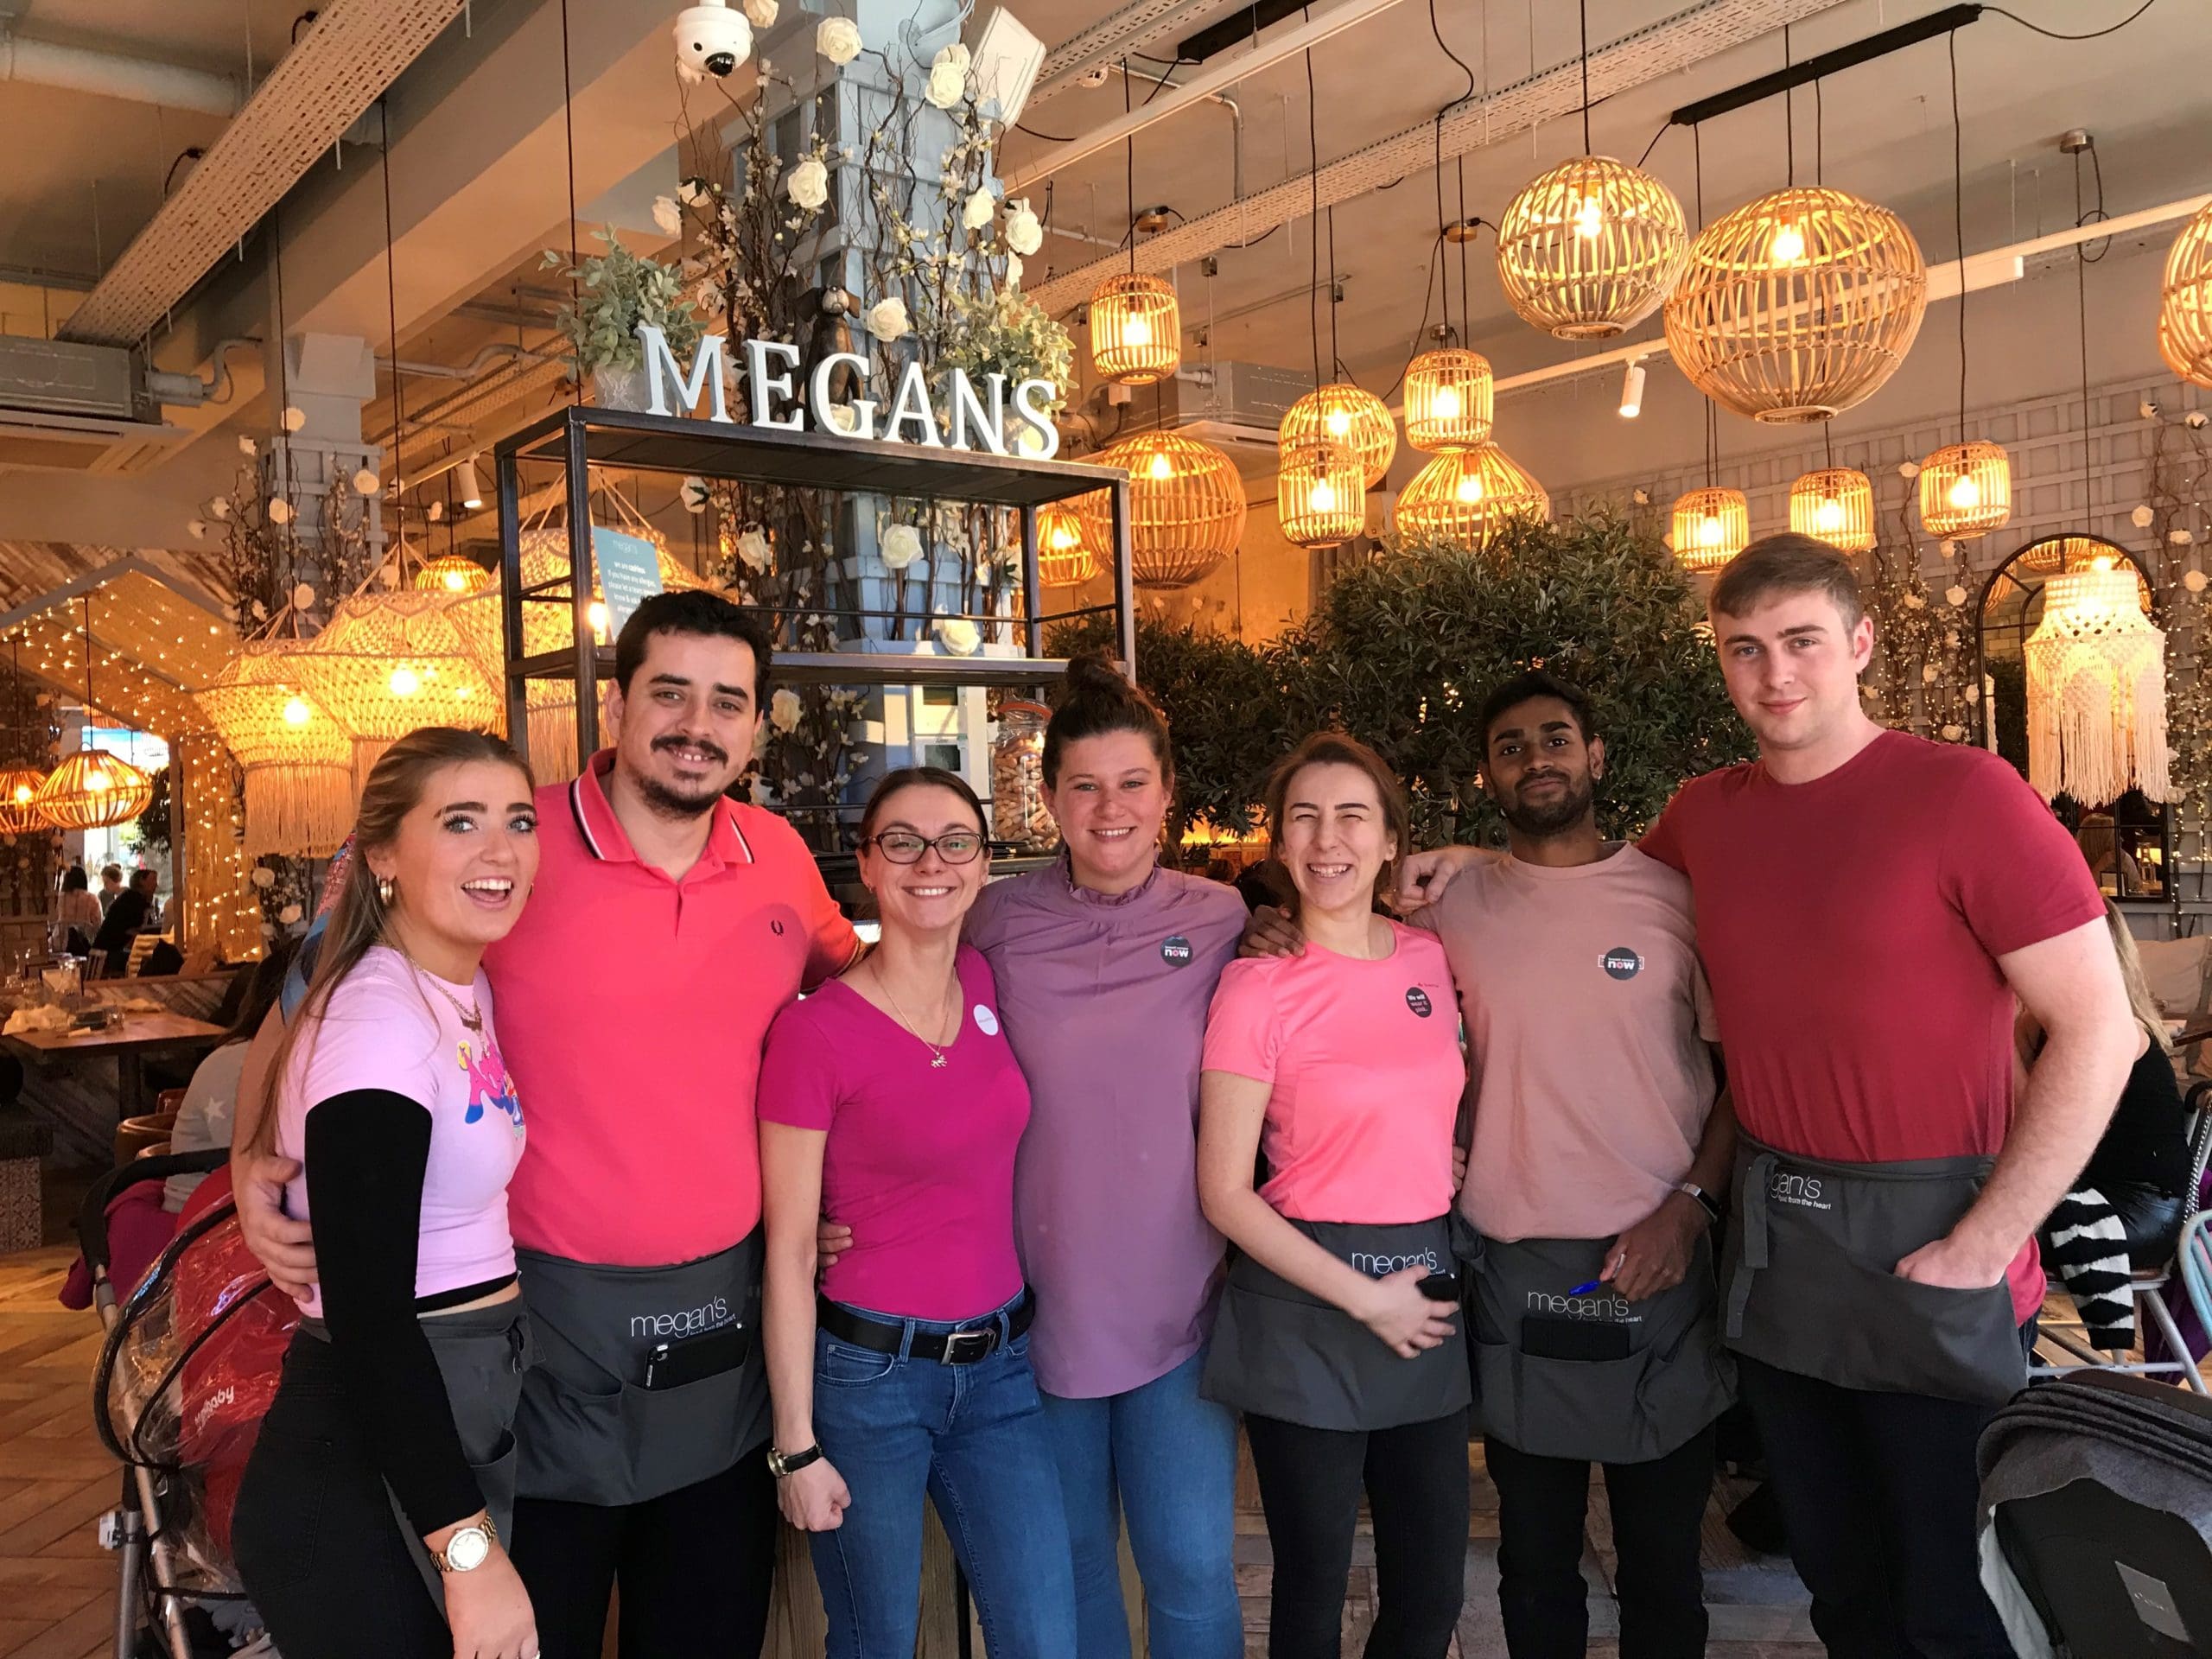 Wear it pink - megan's restaurant london supporting local community and charities